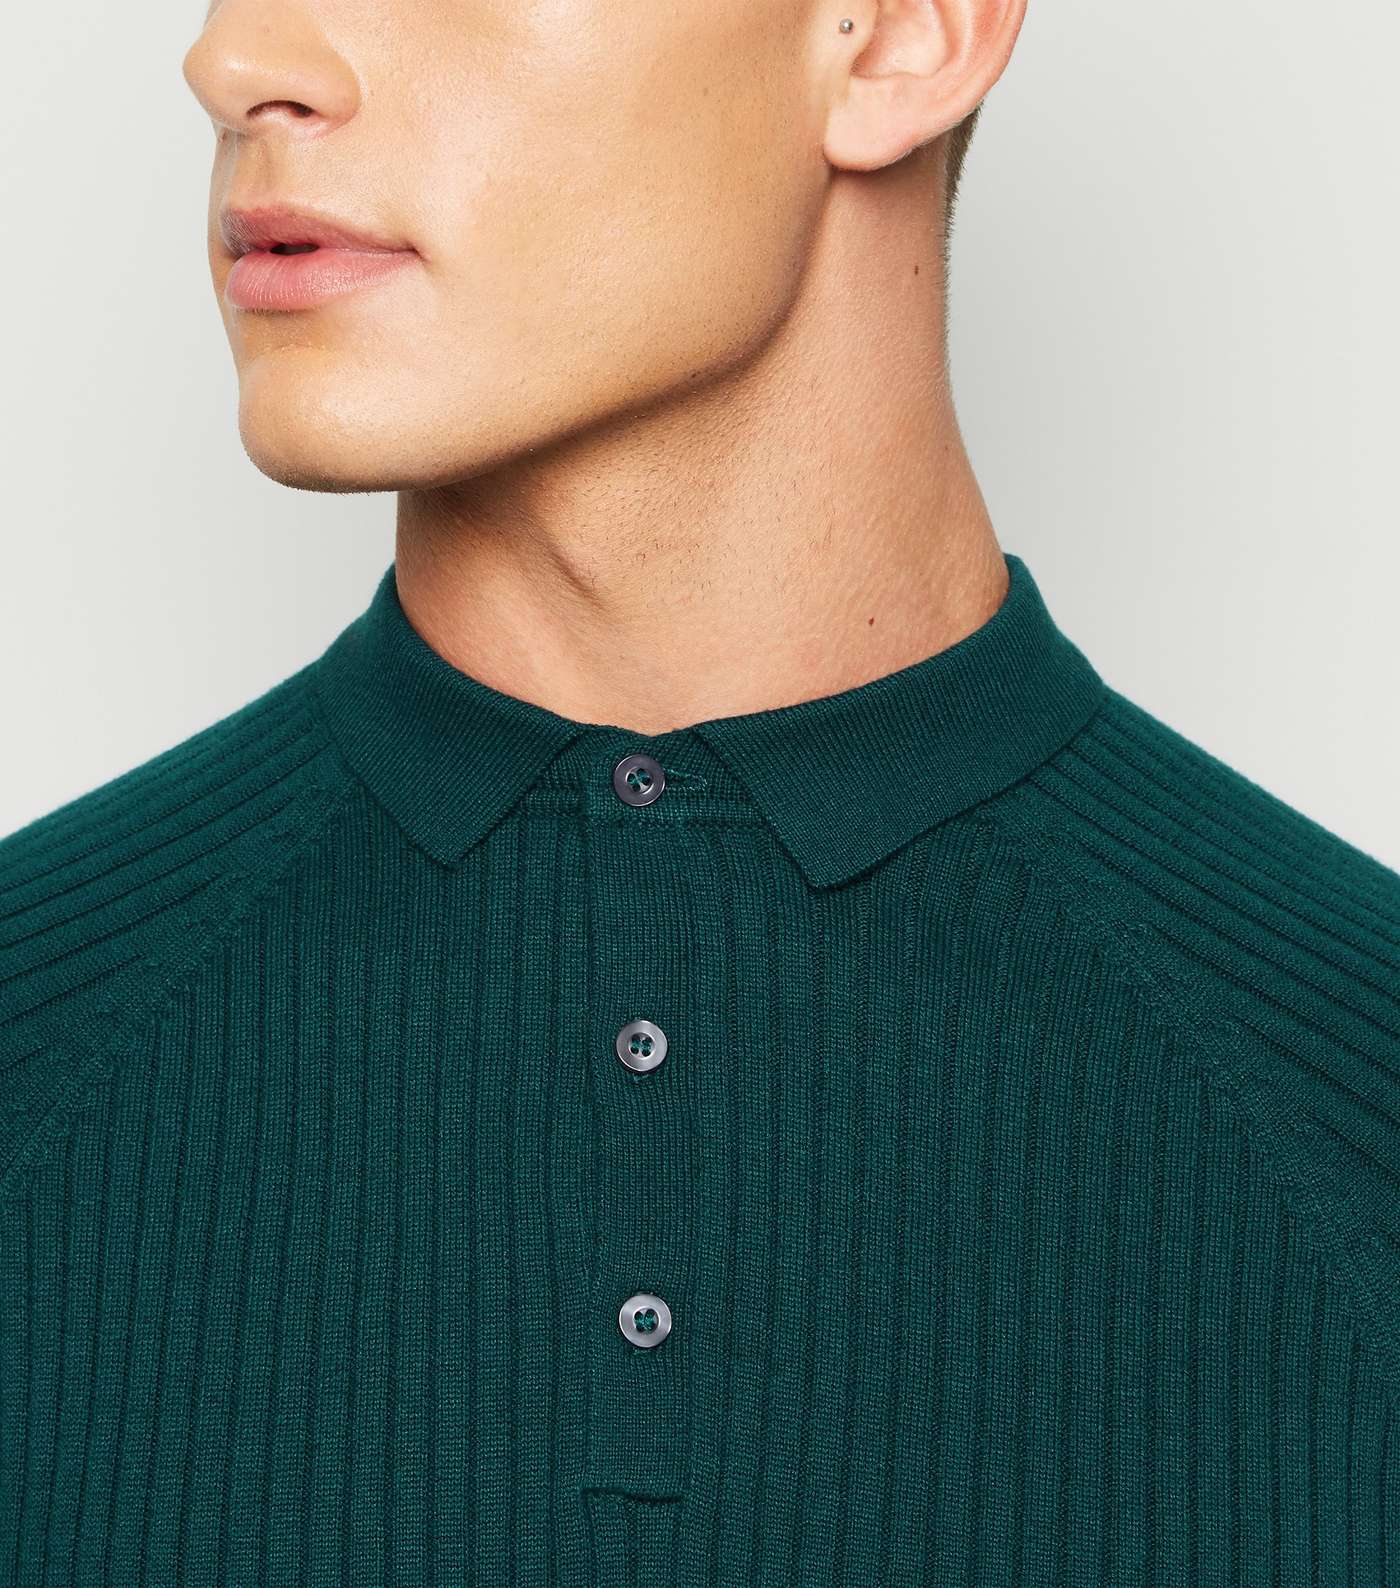 Teal Ribbed Muscle Fit Polo Shirt Image 5